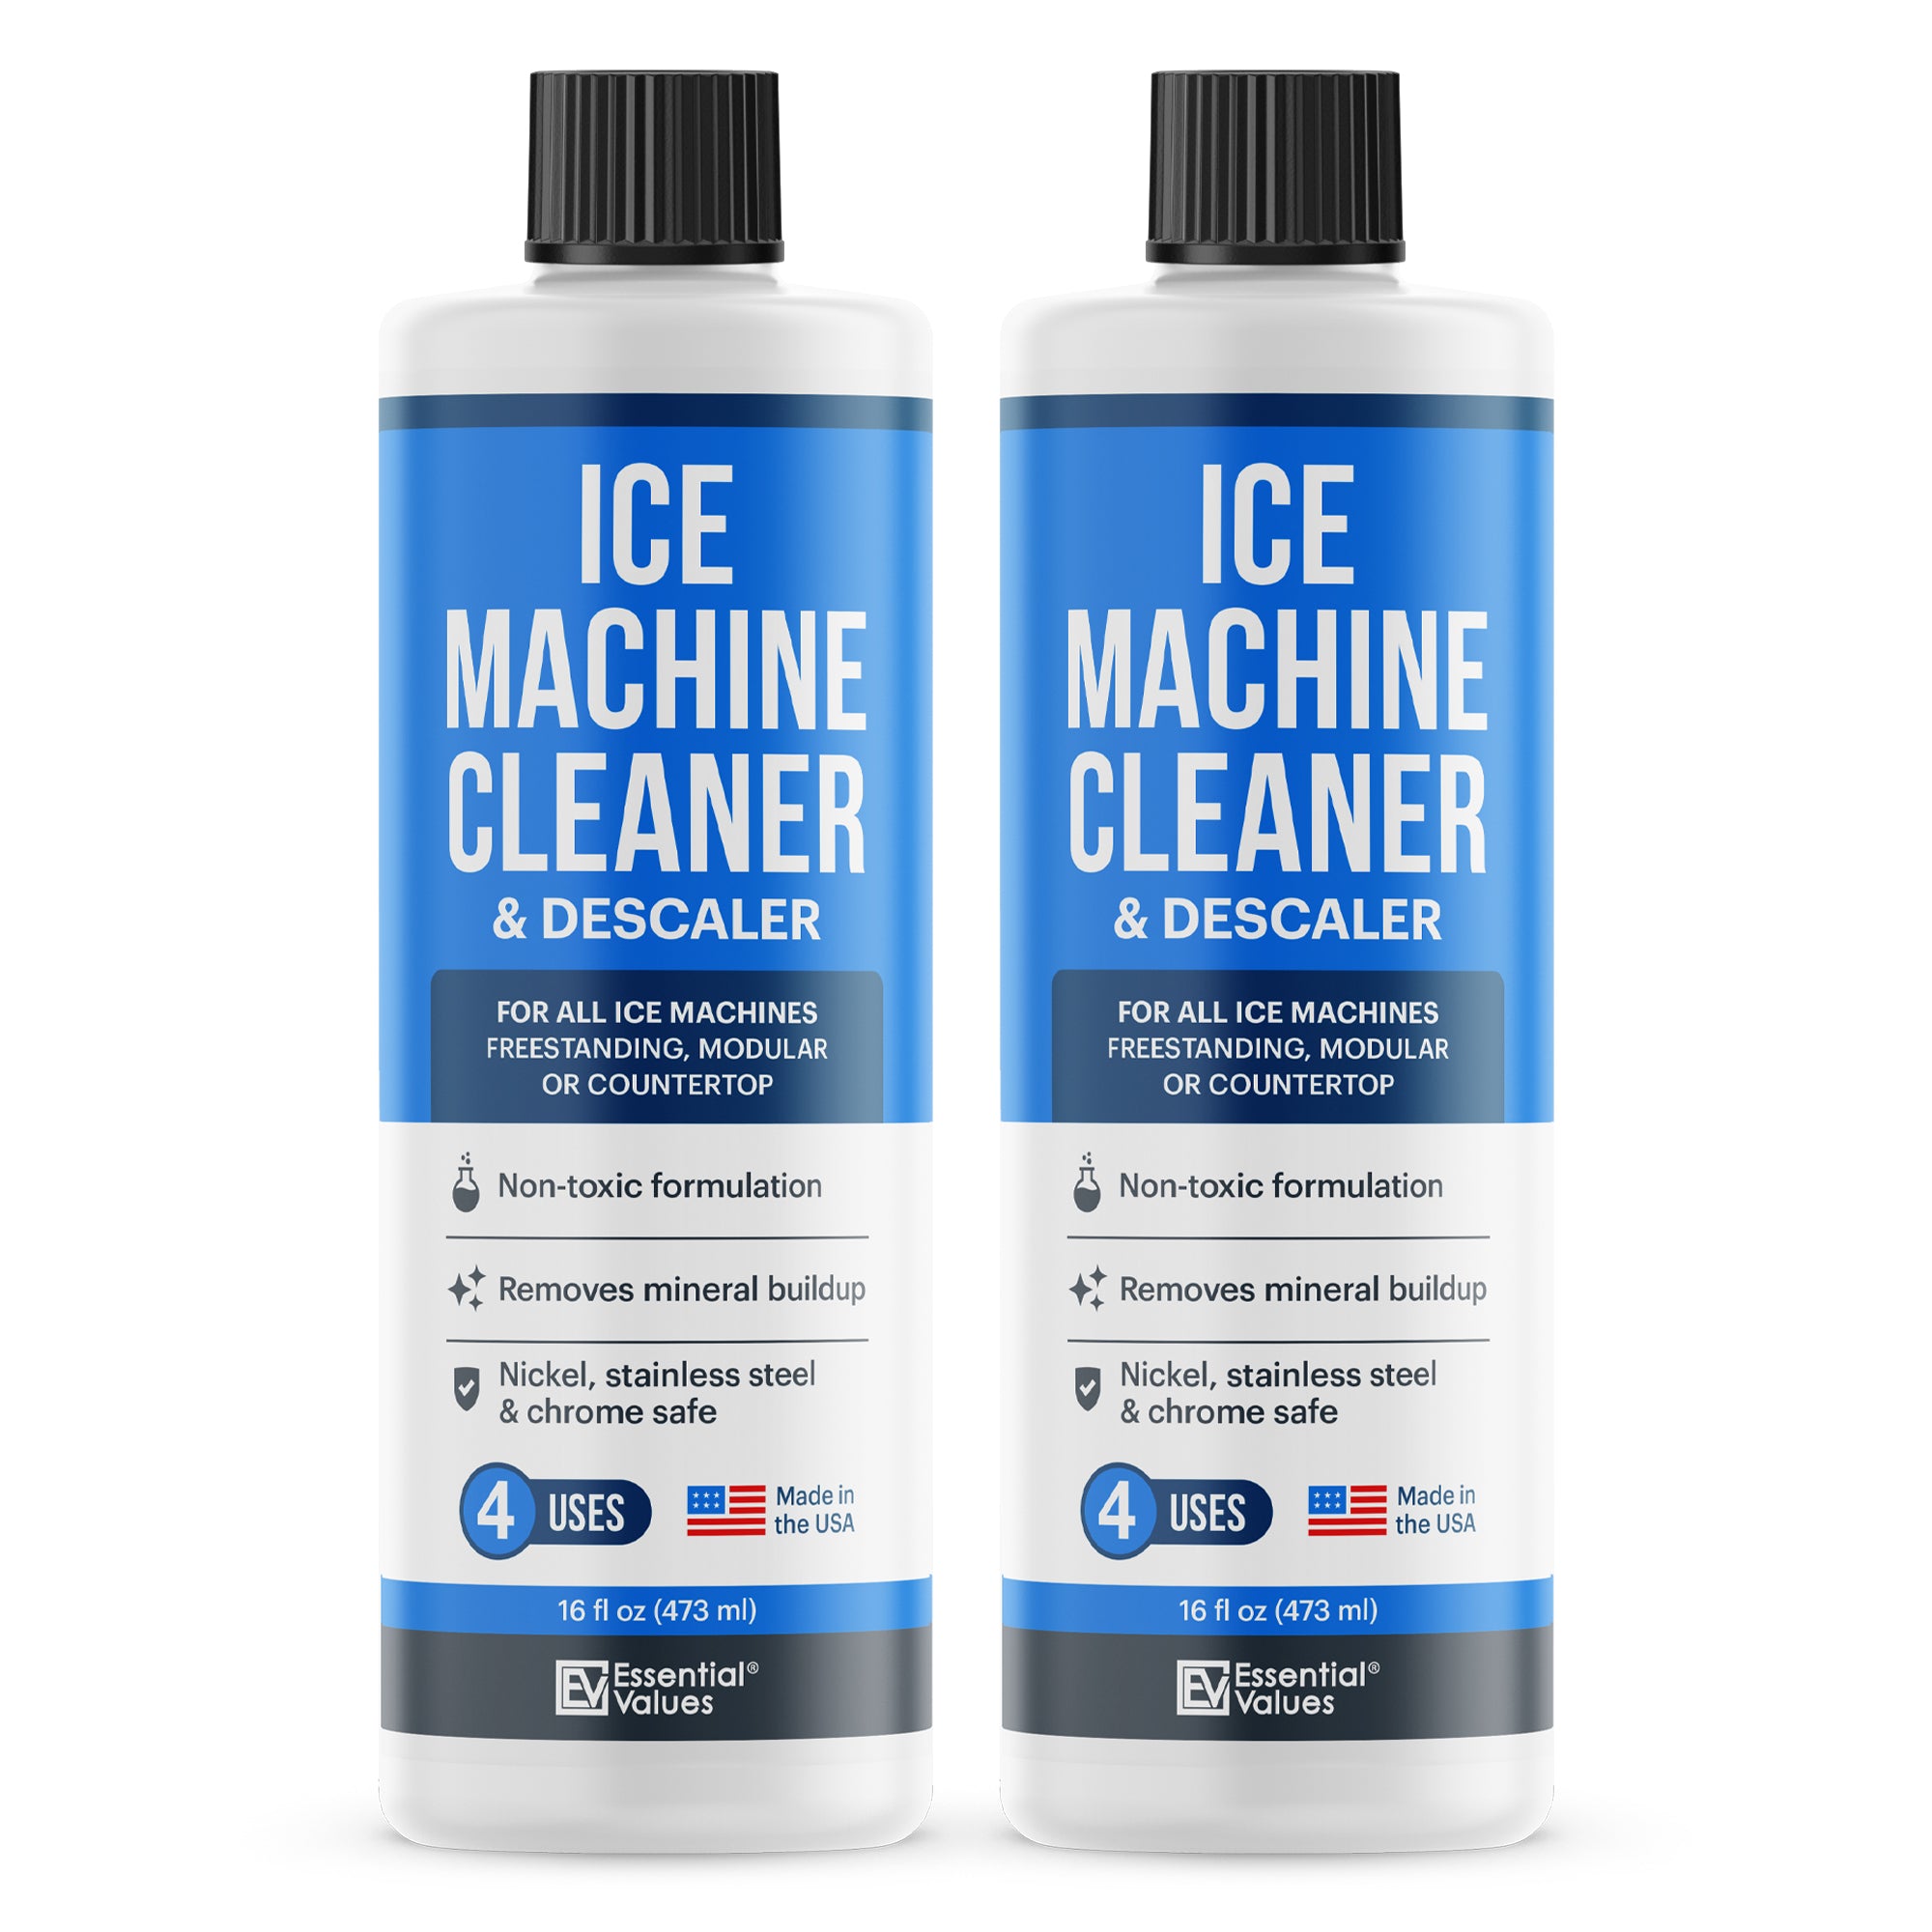 Essential Cleaning Tips for Commercial Ice Machines: Maintenance Made Easy